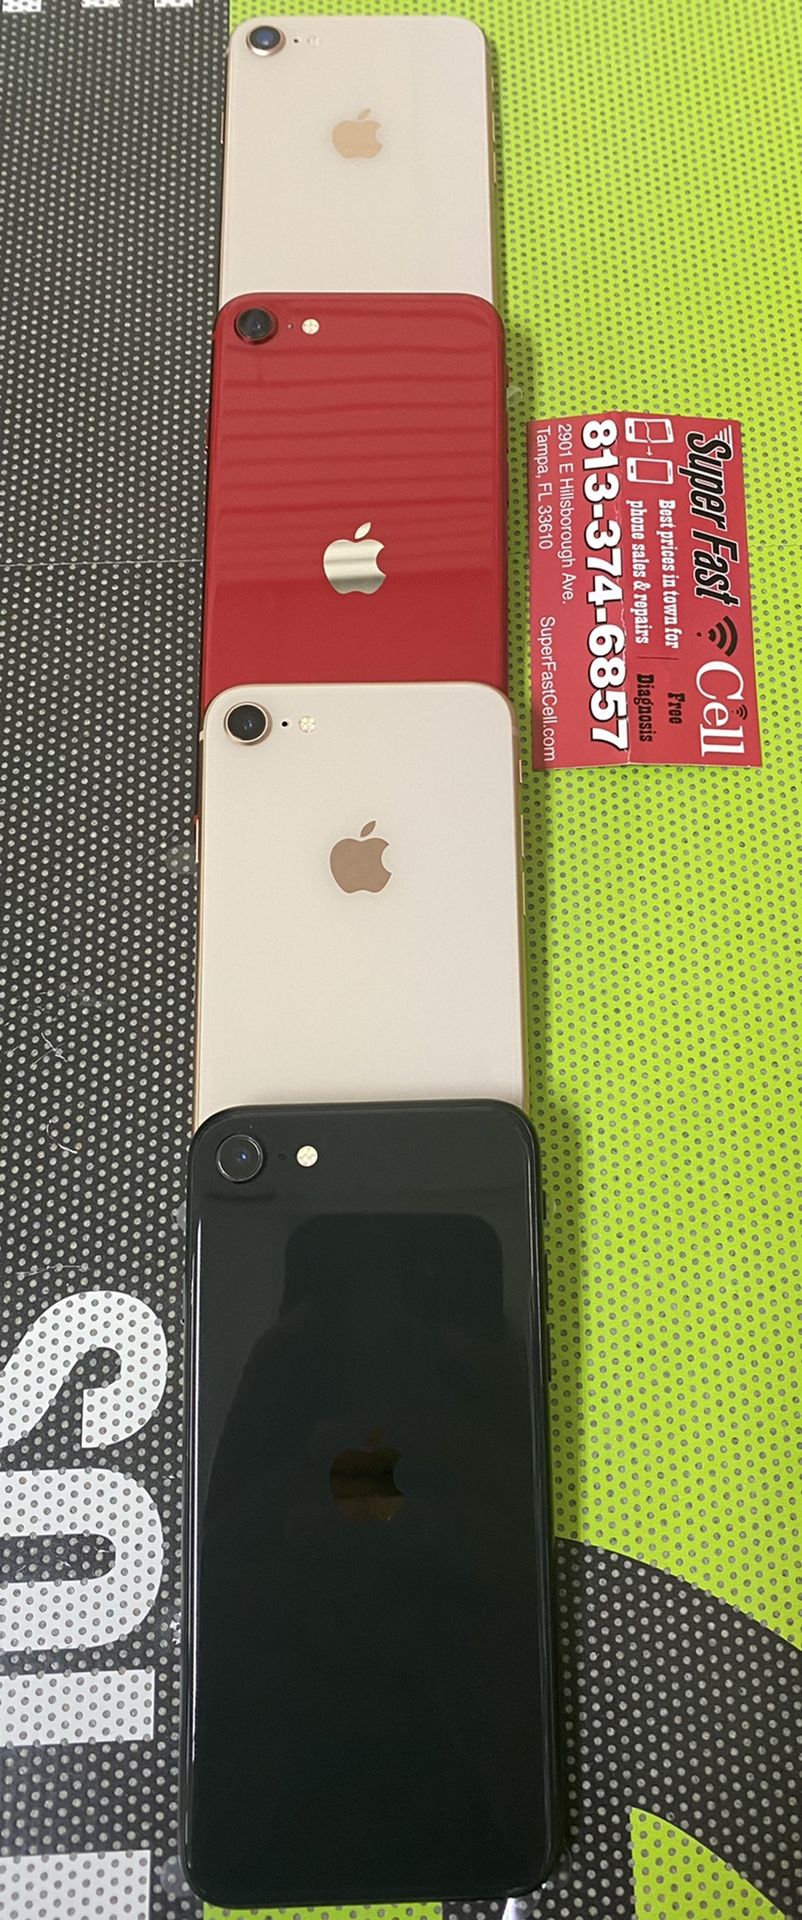 📲🔥iPhone 8 64Gb factory unlocked with warranty